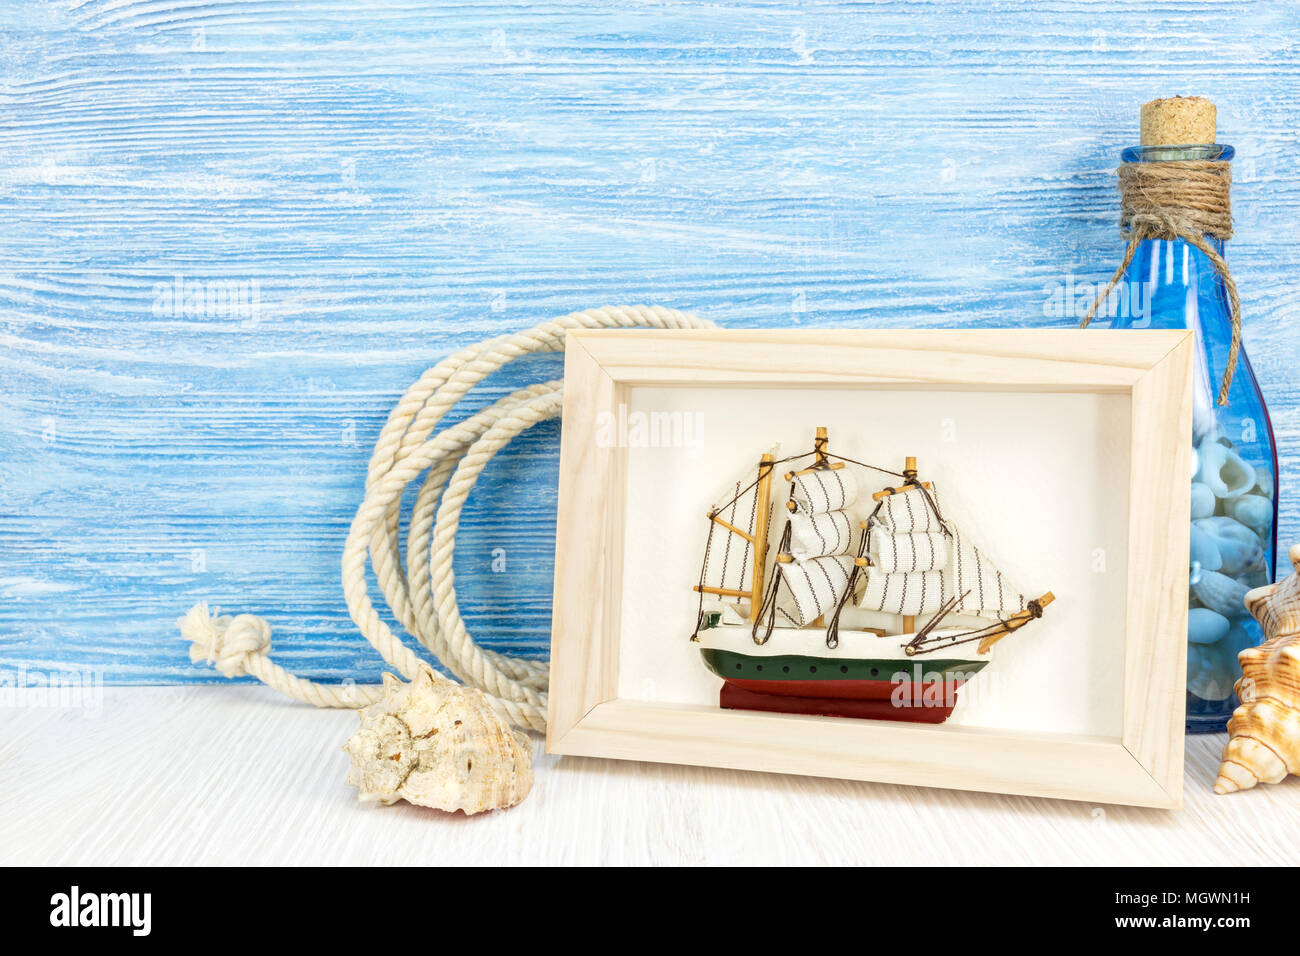 maritime background with sea shells, picture frame, ship and bottle on weathered blue wood  Stock Photo